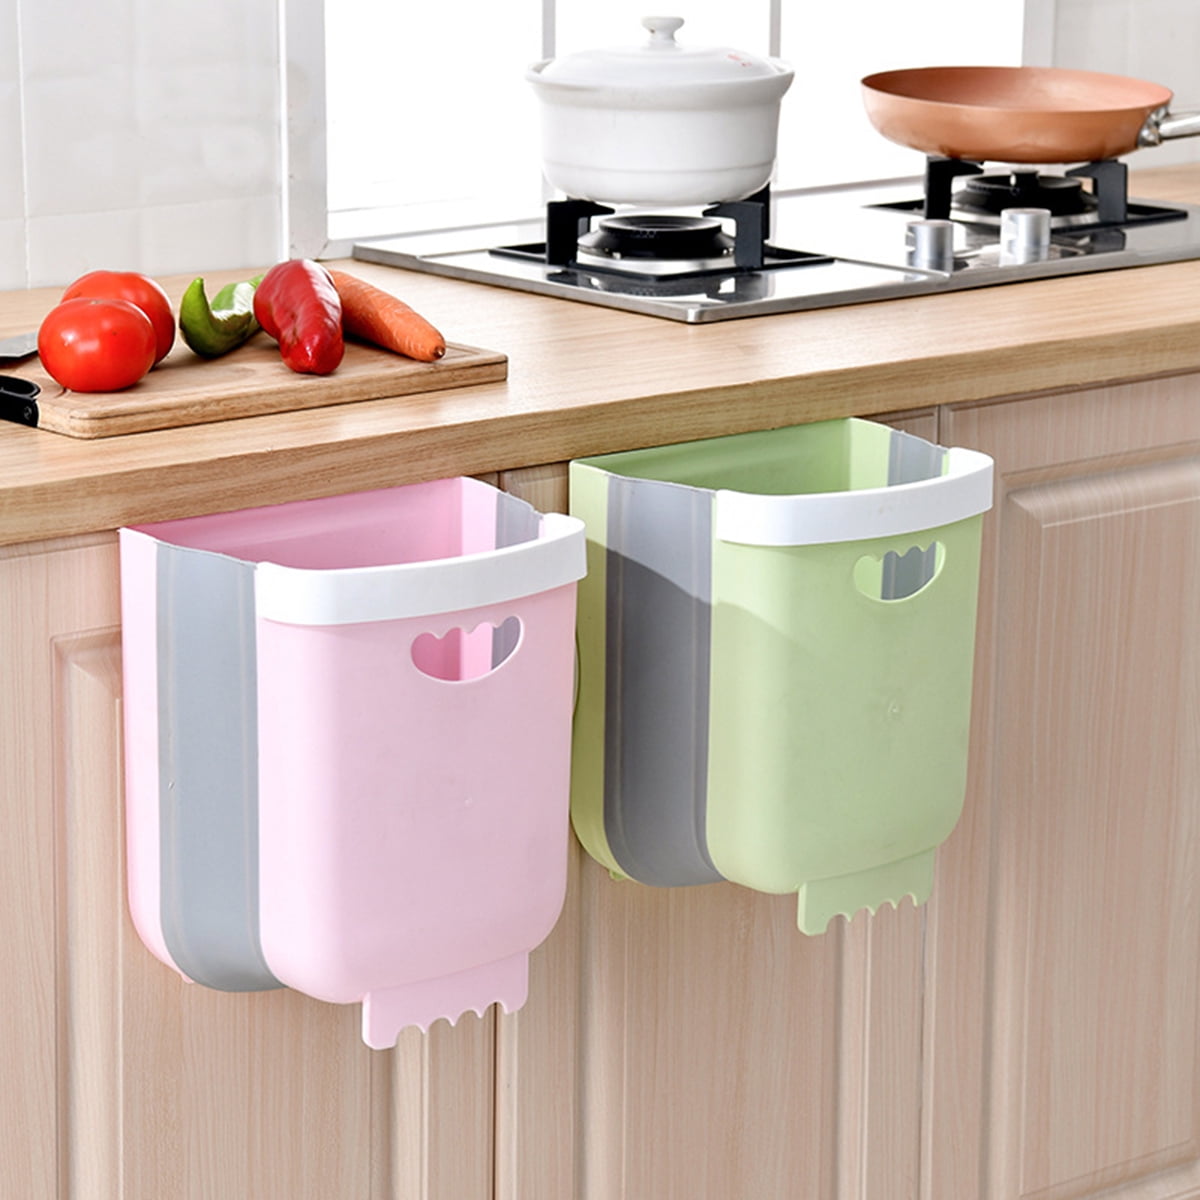 HYISHION Folding Trash Can|Food Waste Bin Hanging for Kitchen Cabinet Door with Lid|Upgrade Wall Mounted Folding Garbage Can for Kitchen Bedroom Dorm Room 